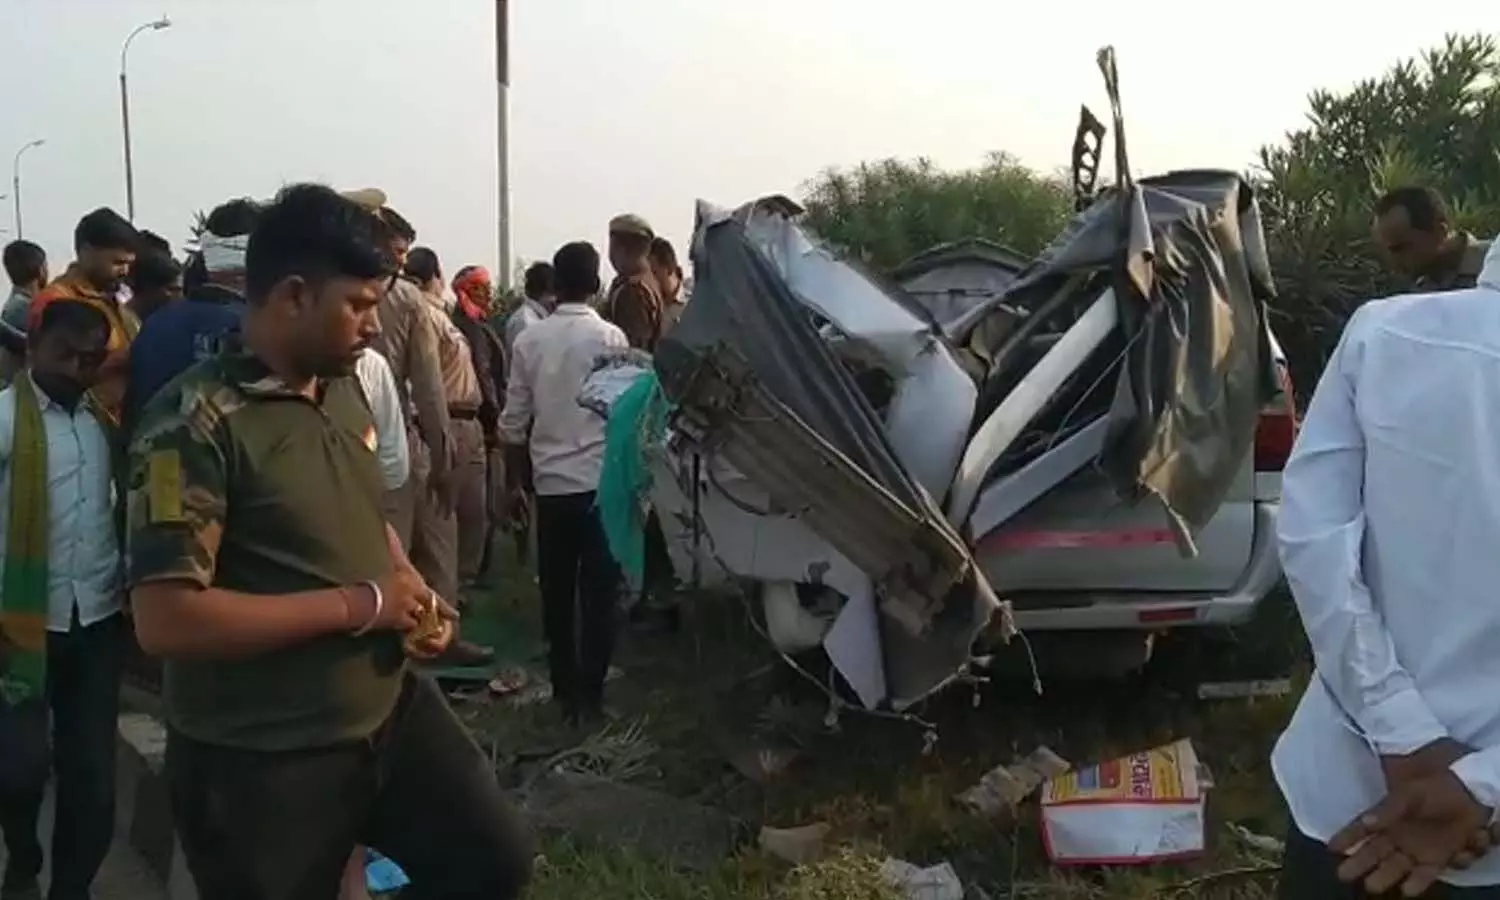 Tavera car overturned after hitting a pillar in Prayagraj, 5 people died in a road accident